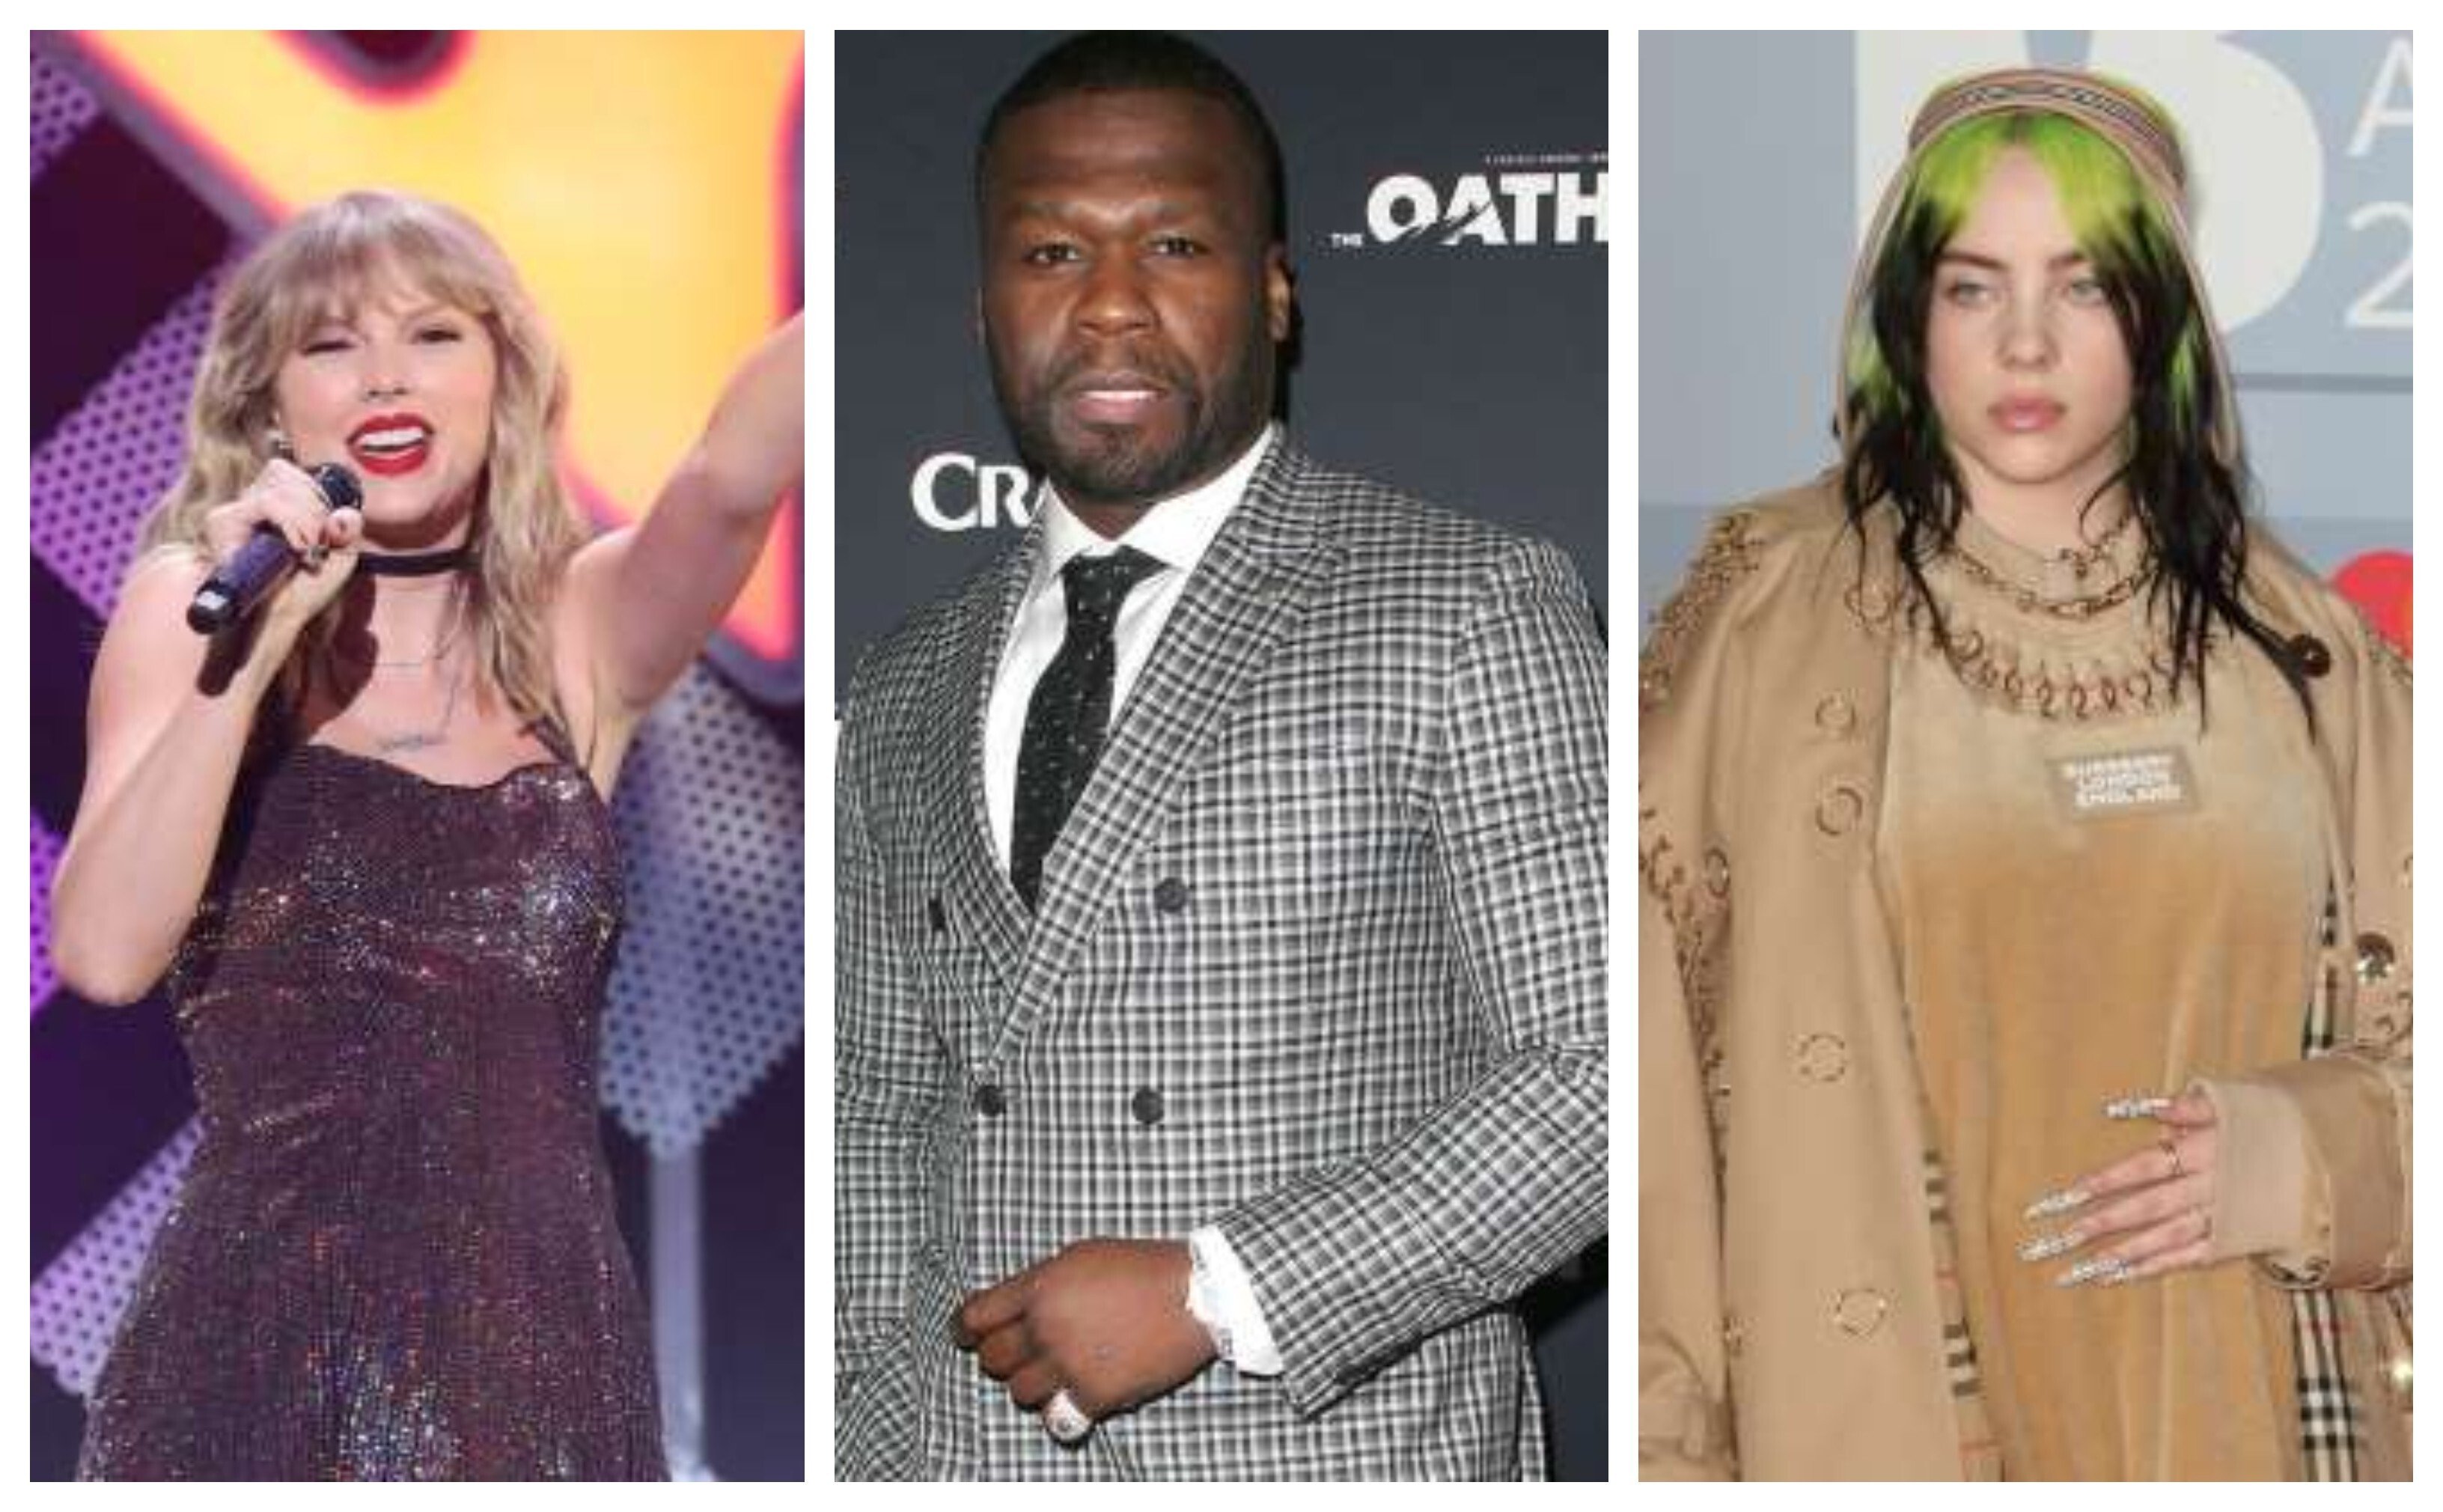 Who did Taylor Swift, 50 Cent and Billie Eilish vote for in the 2020 US presidential election? Photo: Bang Showbiz